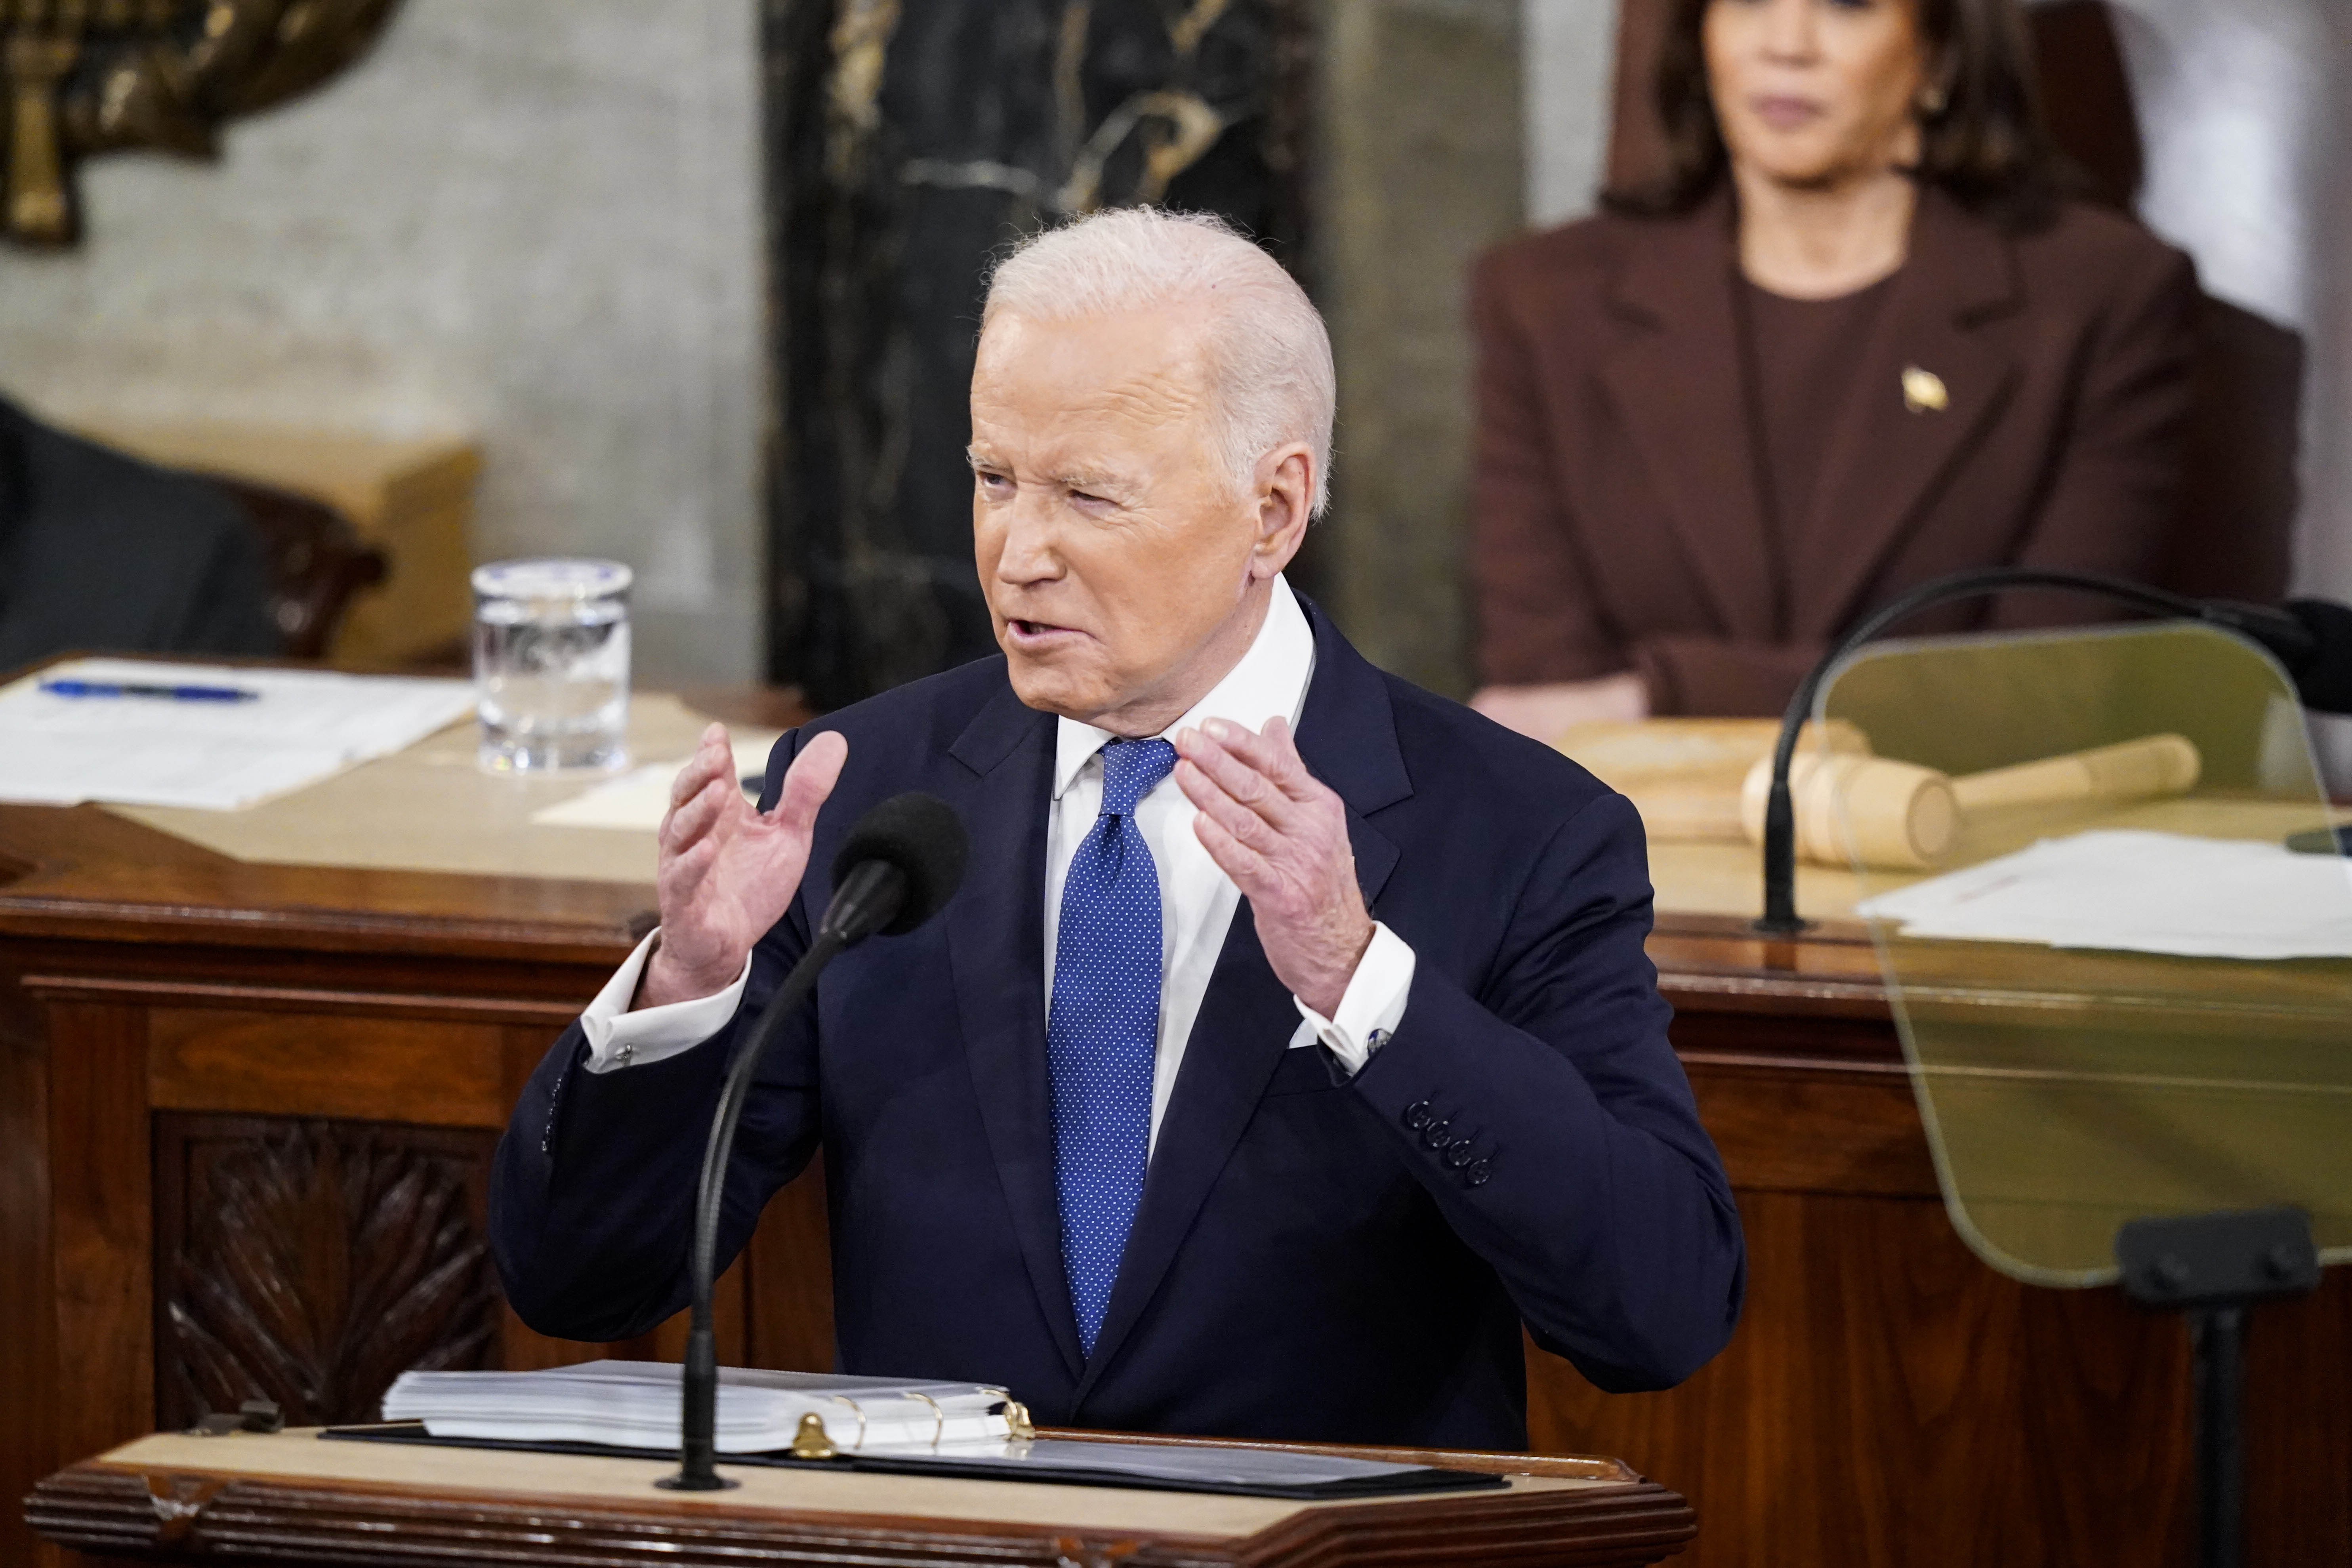 March 1, 2022; Washington, DC, USA; President Joe Biden, flanked by Vice President Kamala Harris, delivers his State of the Union address to a joint session of Congress on Capitol Hill on Tuesday, March 01, 2022 in Washington, DC.  Mandatory Credit: Jabin Botsford/Pool via USA TODAY NETWORK